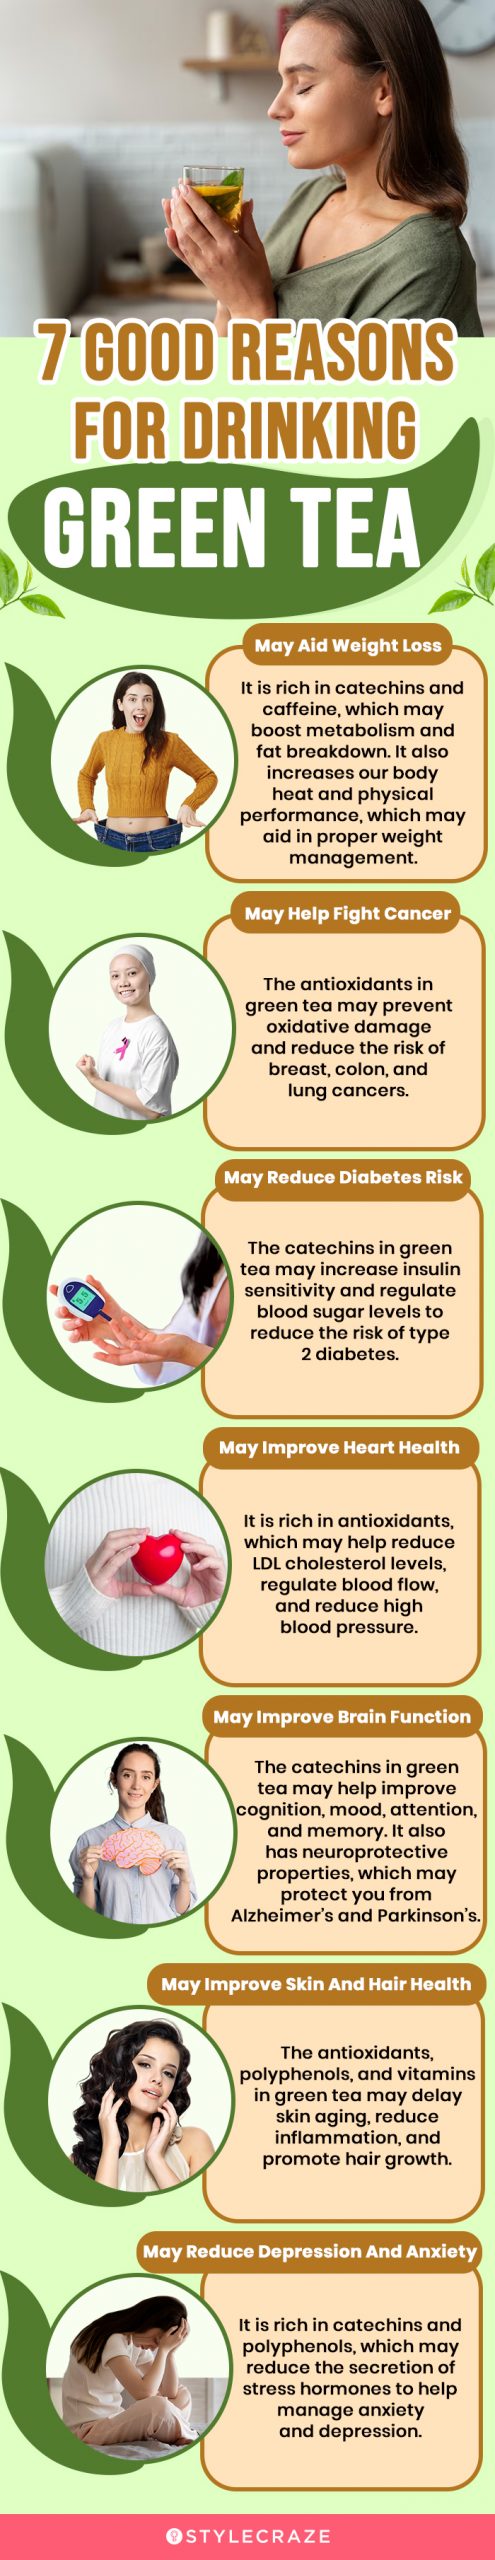 7 good reasons for drinking green tea (infographic)